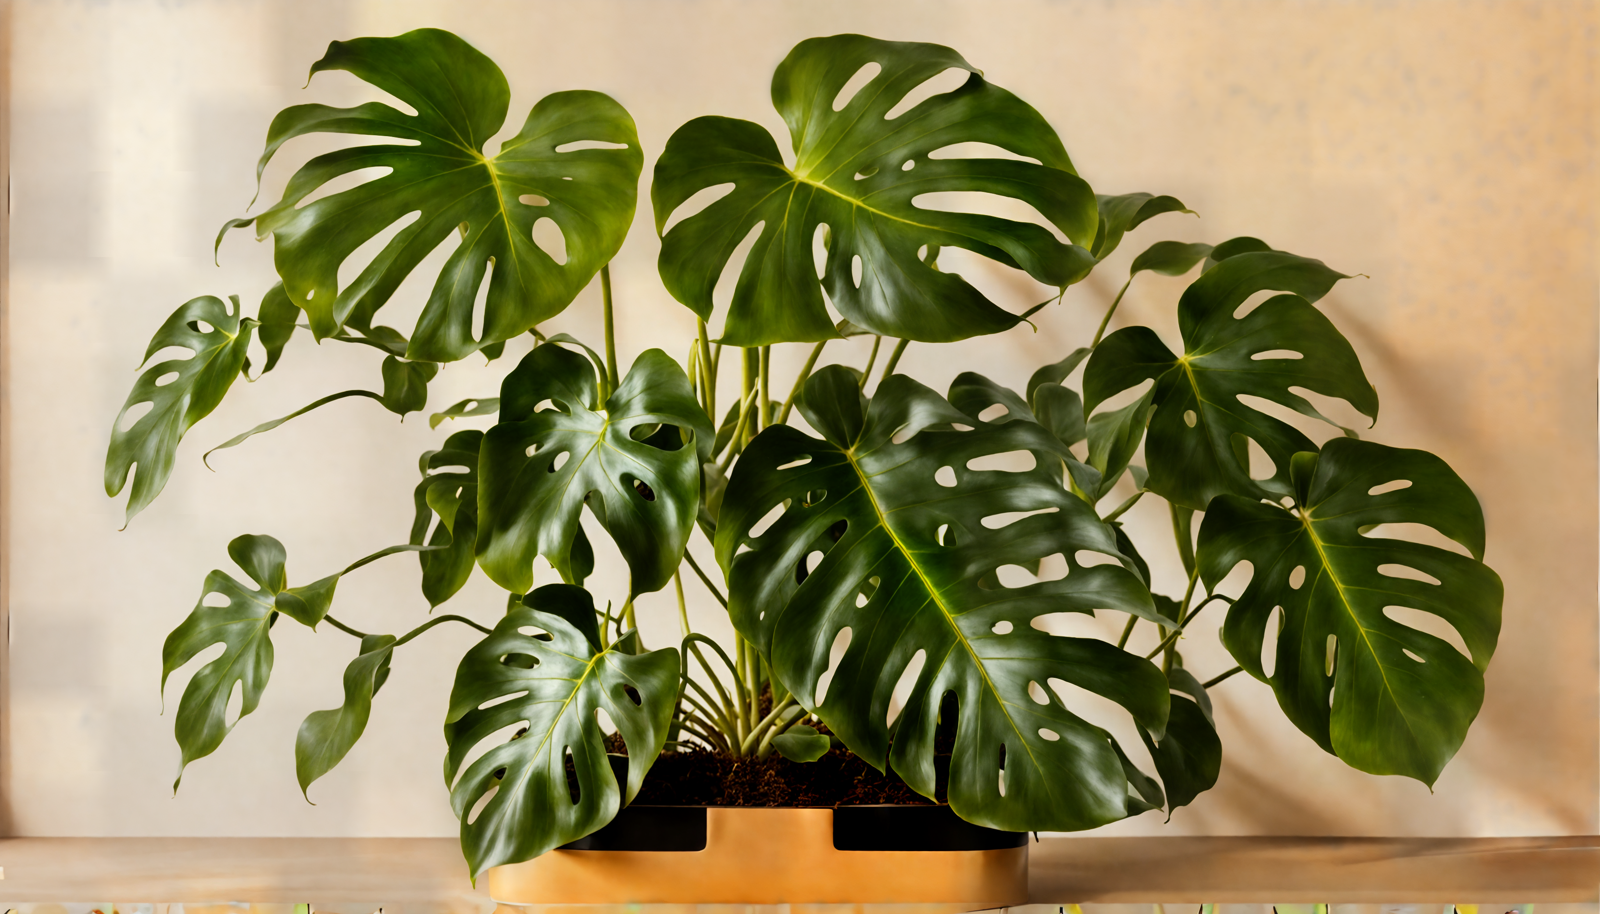 Monstera deliciosa in a planter on a wooden surface, with clear lighting and neutral decor.